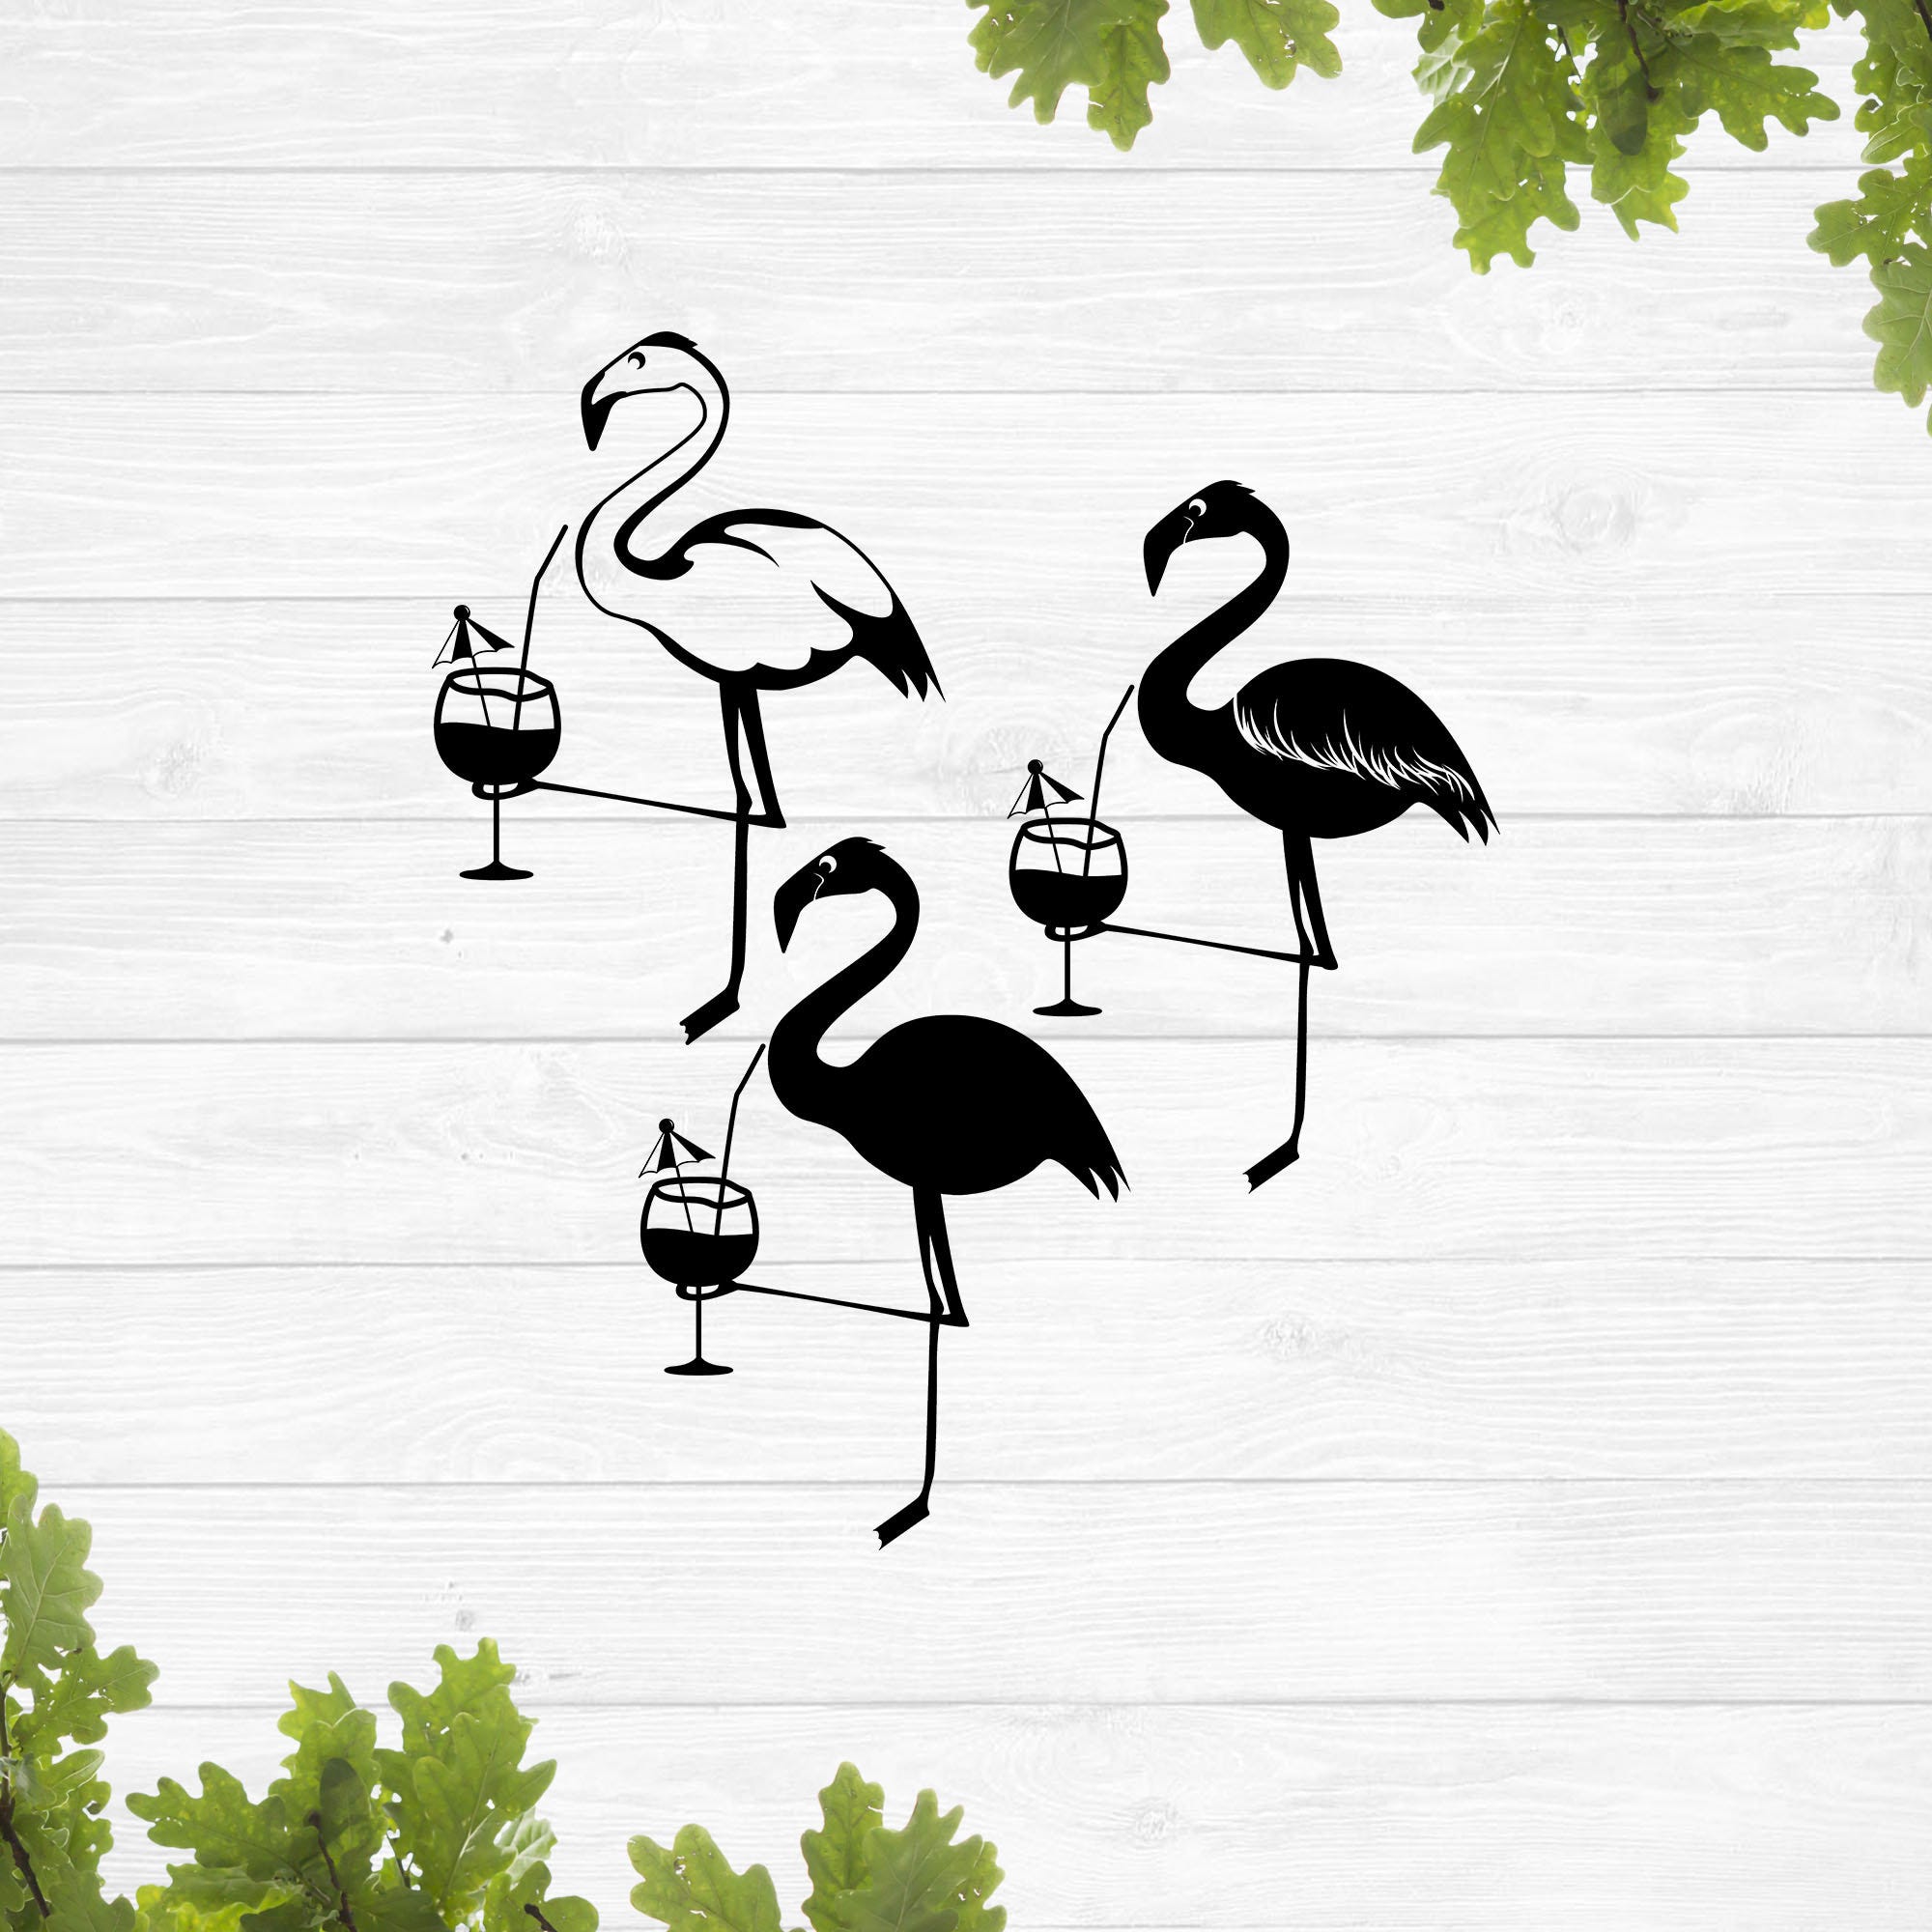 Flamingo drinking svg, drunk flamingo svg, flamingo silhouette svg, with wine glass svg, flamingo outline with drink svg